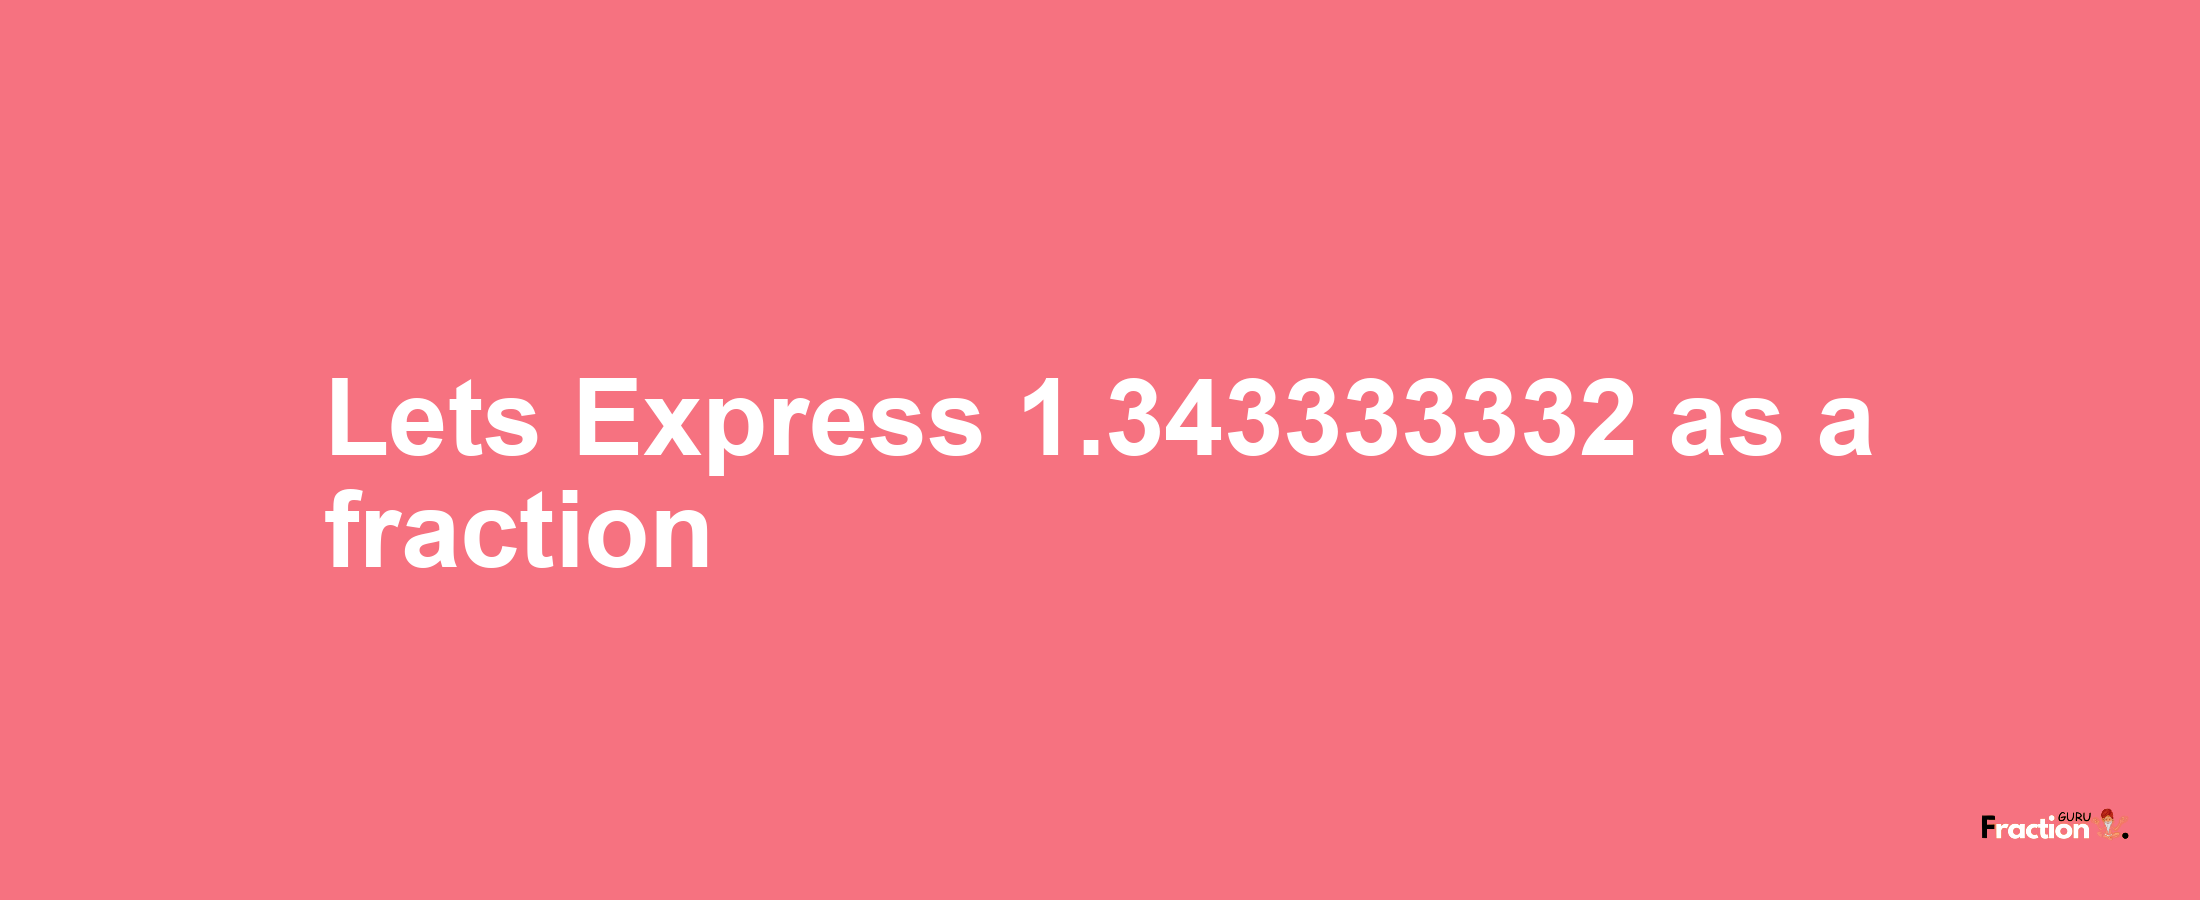 Lets Express 1.343333332 as afraction